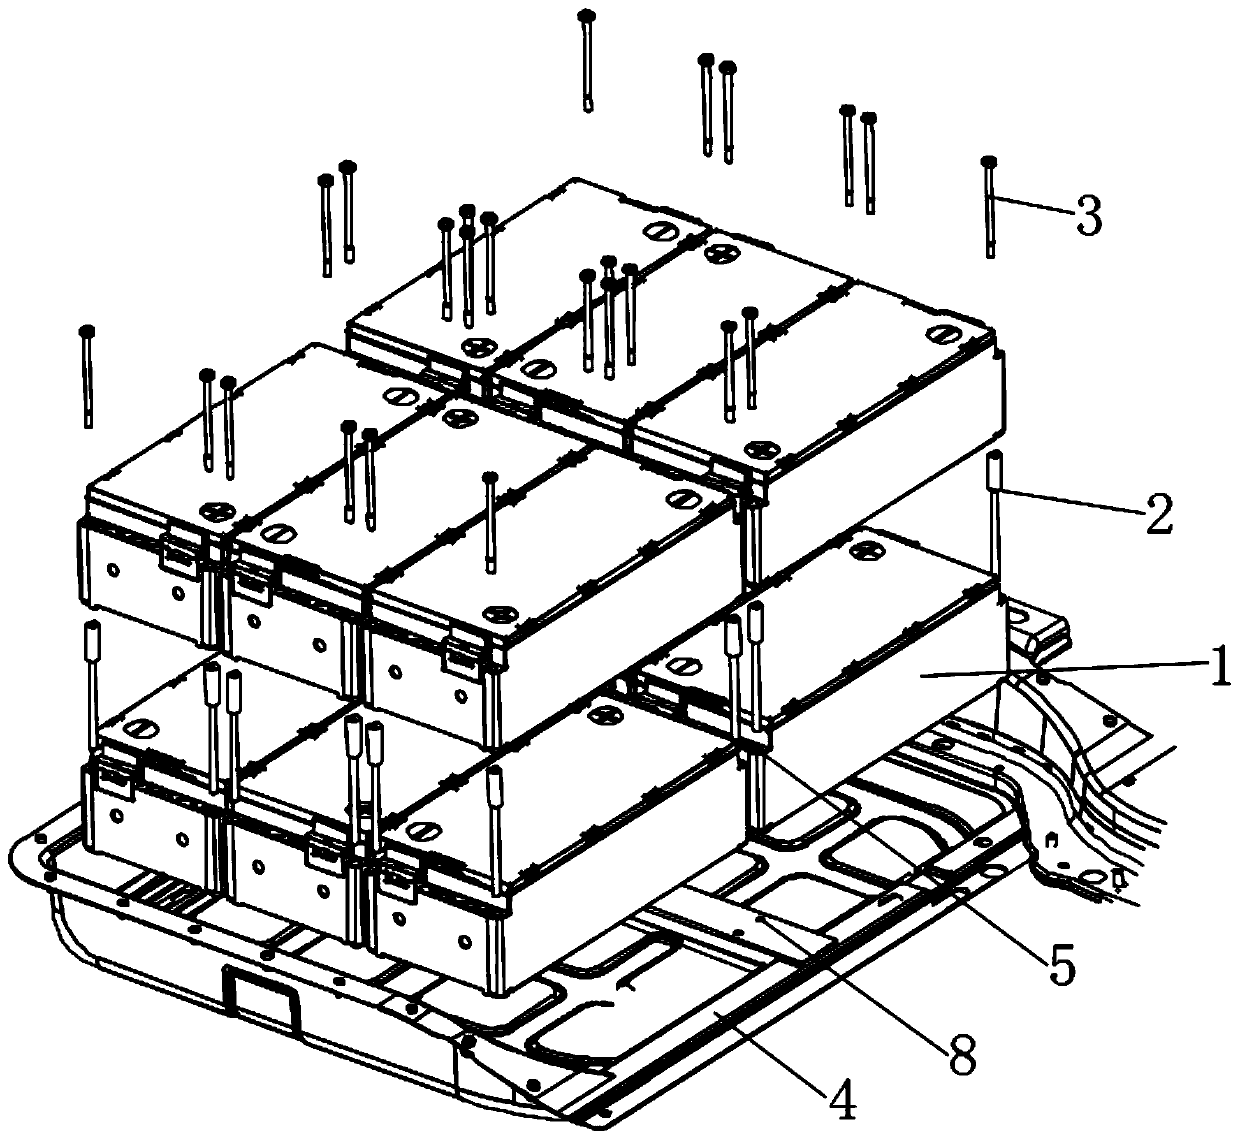 Bolting structure for fixing double-layer module